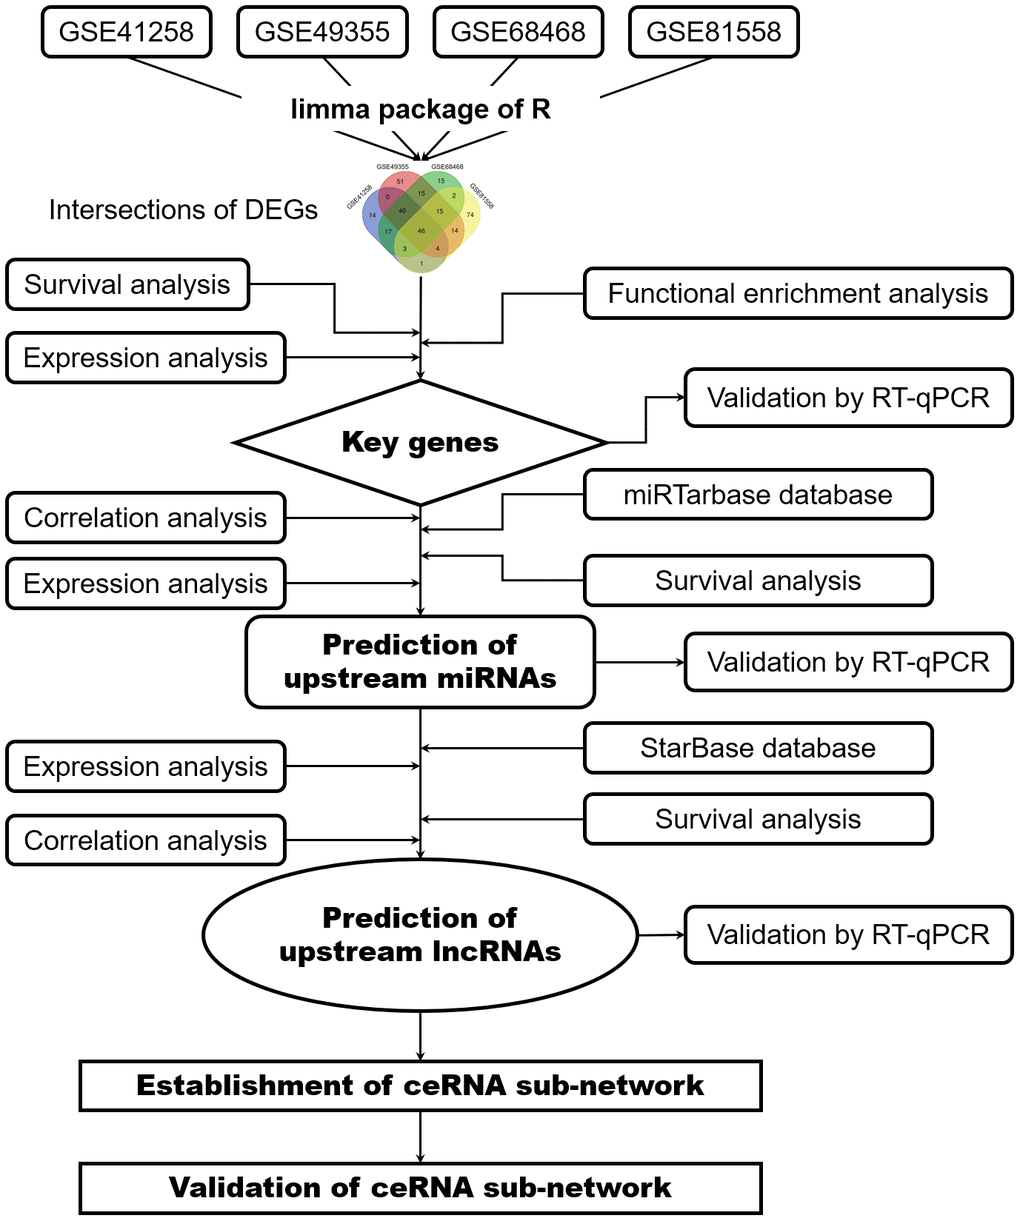 Flowchart of bioinformatics analysis. DEGs, differentially expressed genes; PPI network, protein-protein interaction network; miRNAs, microRNAs; lncRNAs, long non-coding RNAs; ceRNA, competing endogenous RNAs.